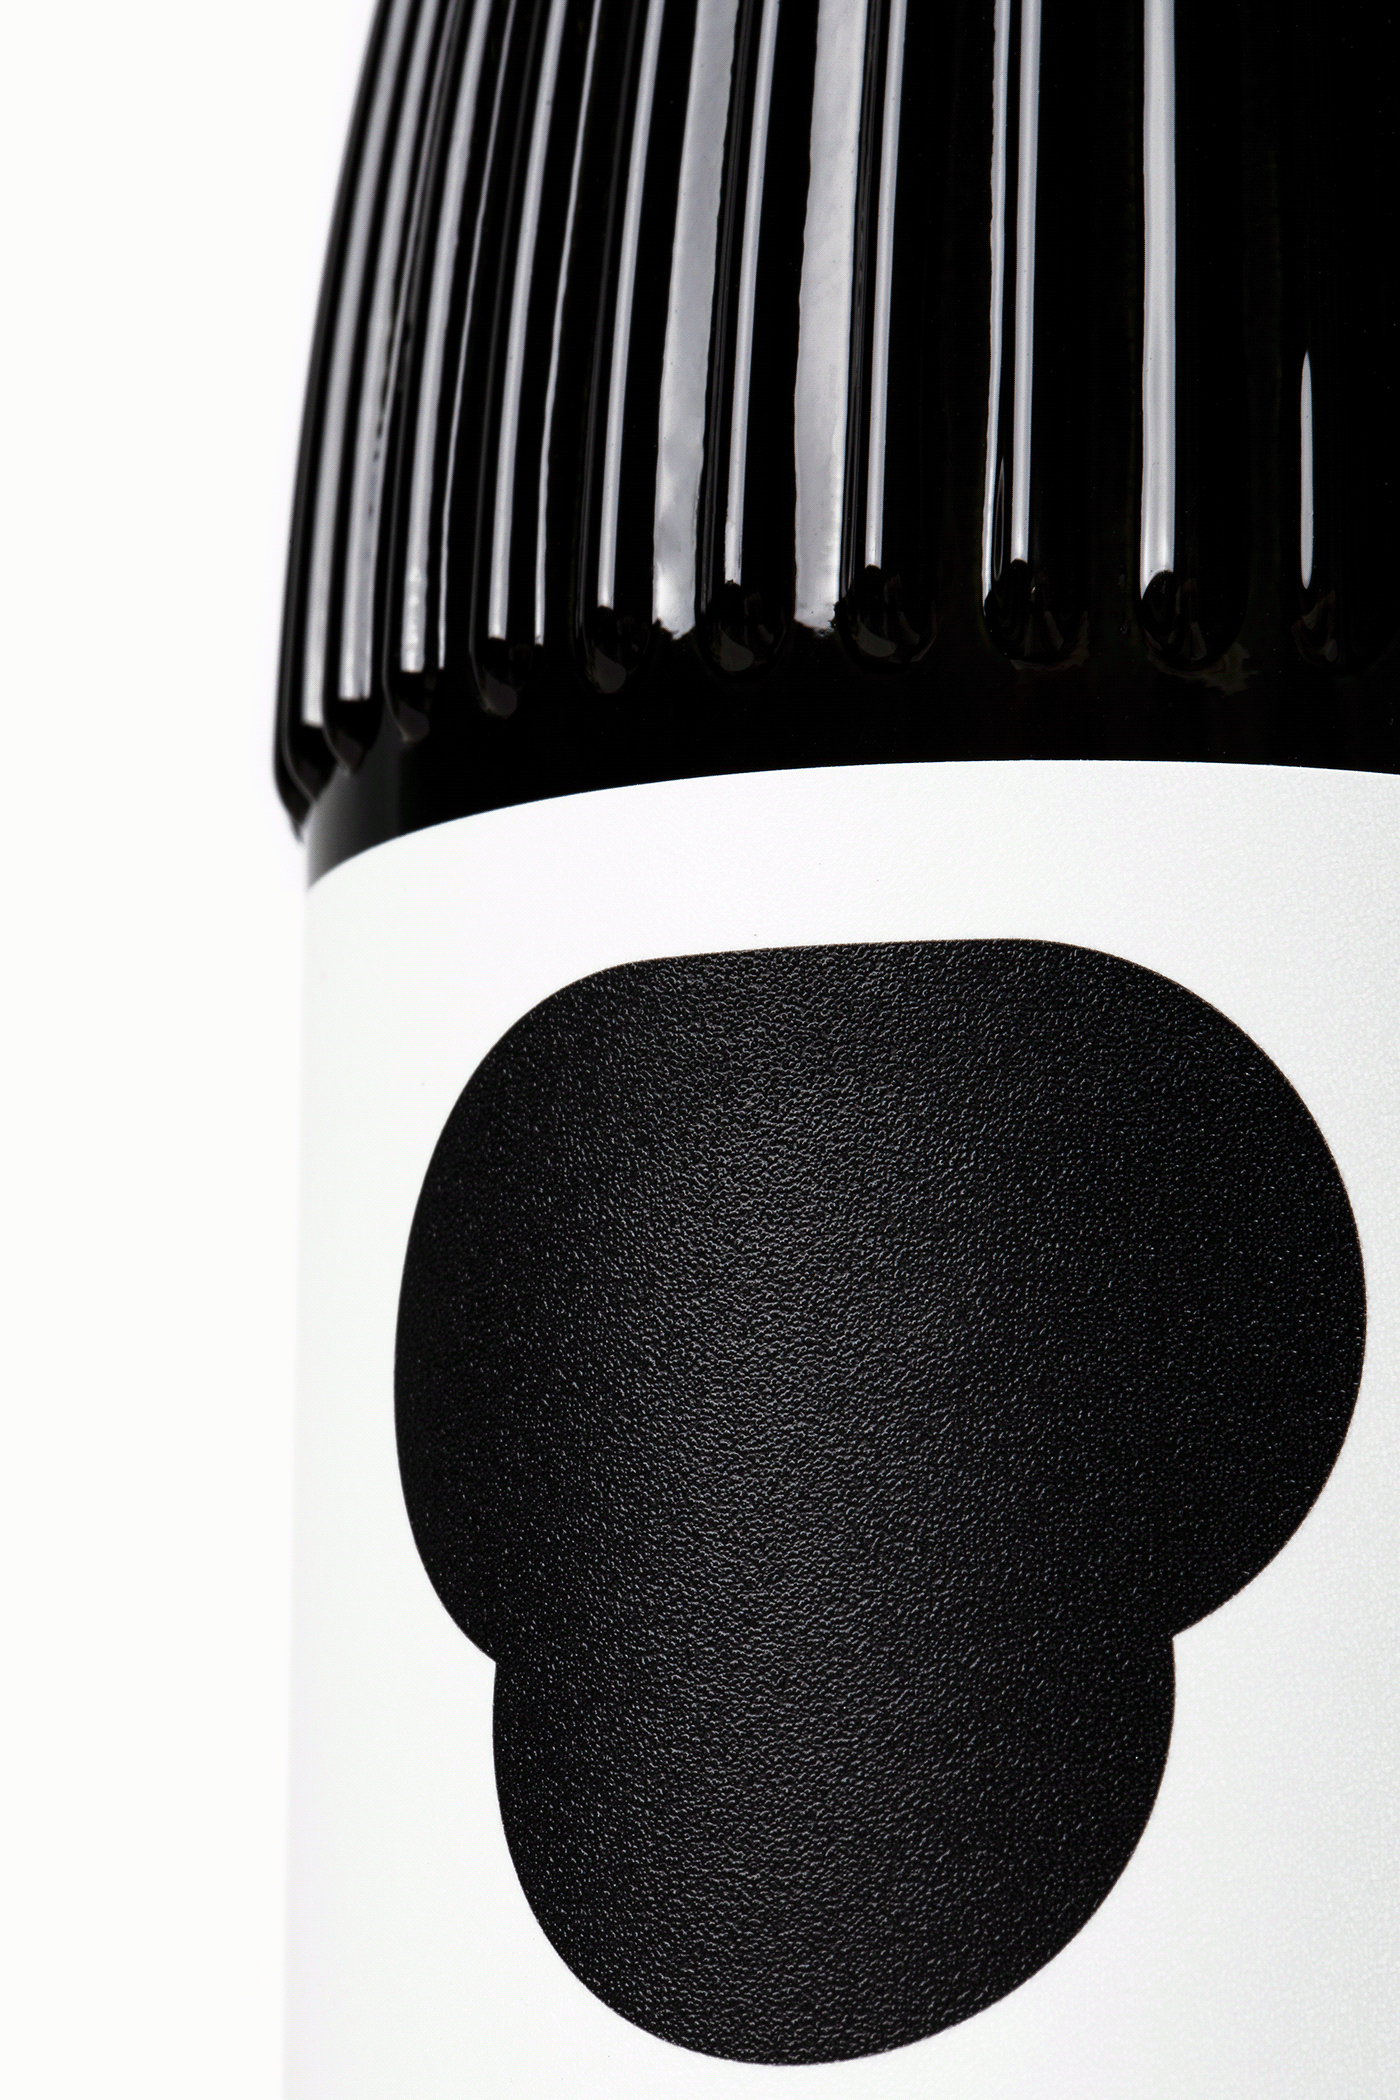 identity branding  typography   blackandwhite bubbles dots graphic design  carbonation oddity bottle product design  geometric Label abstract minimal